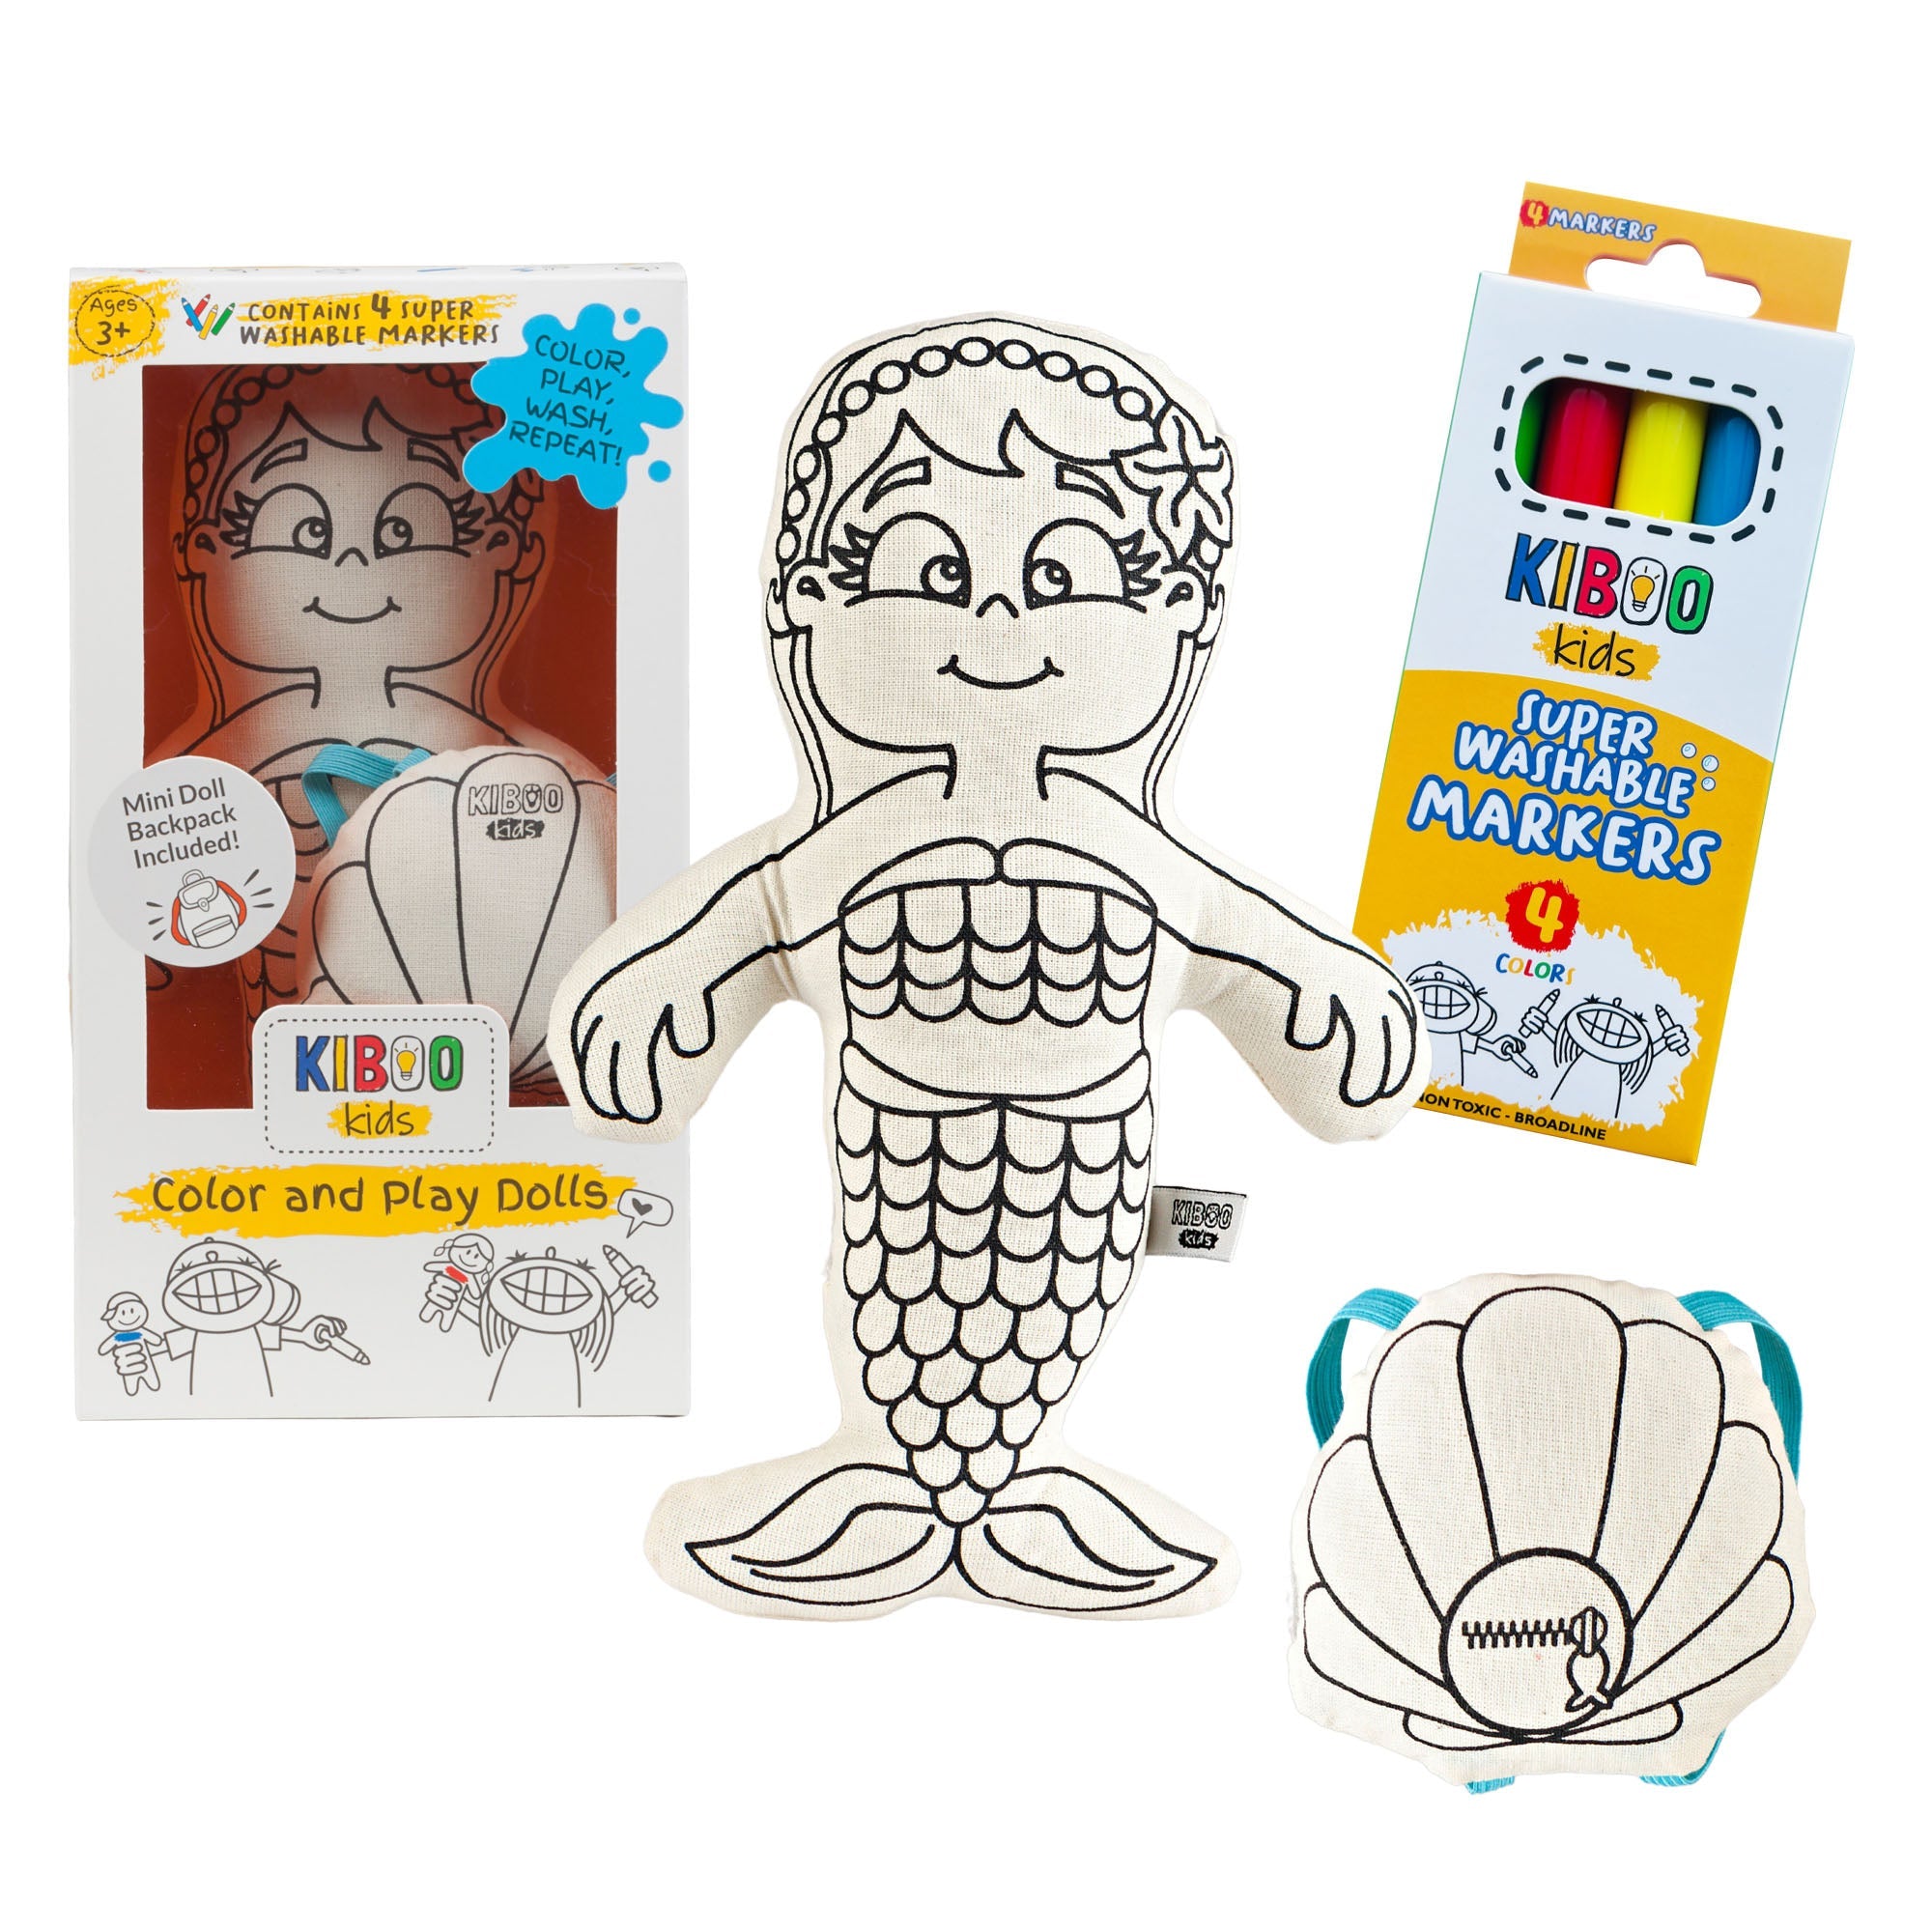 Kiboo Kids: Mermaid With Mini Shell Backpack - Colorable And Washable Doll For Creative Play